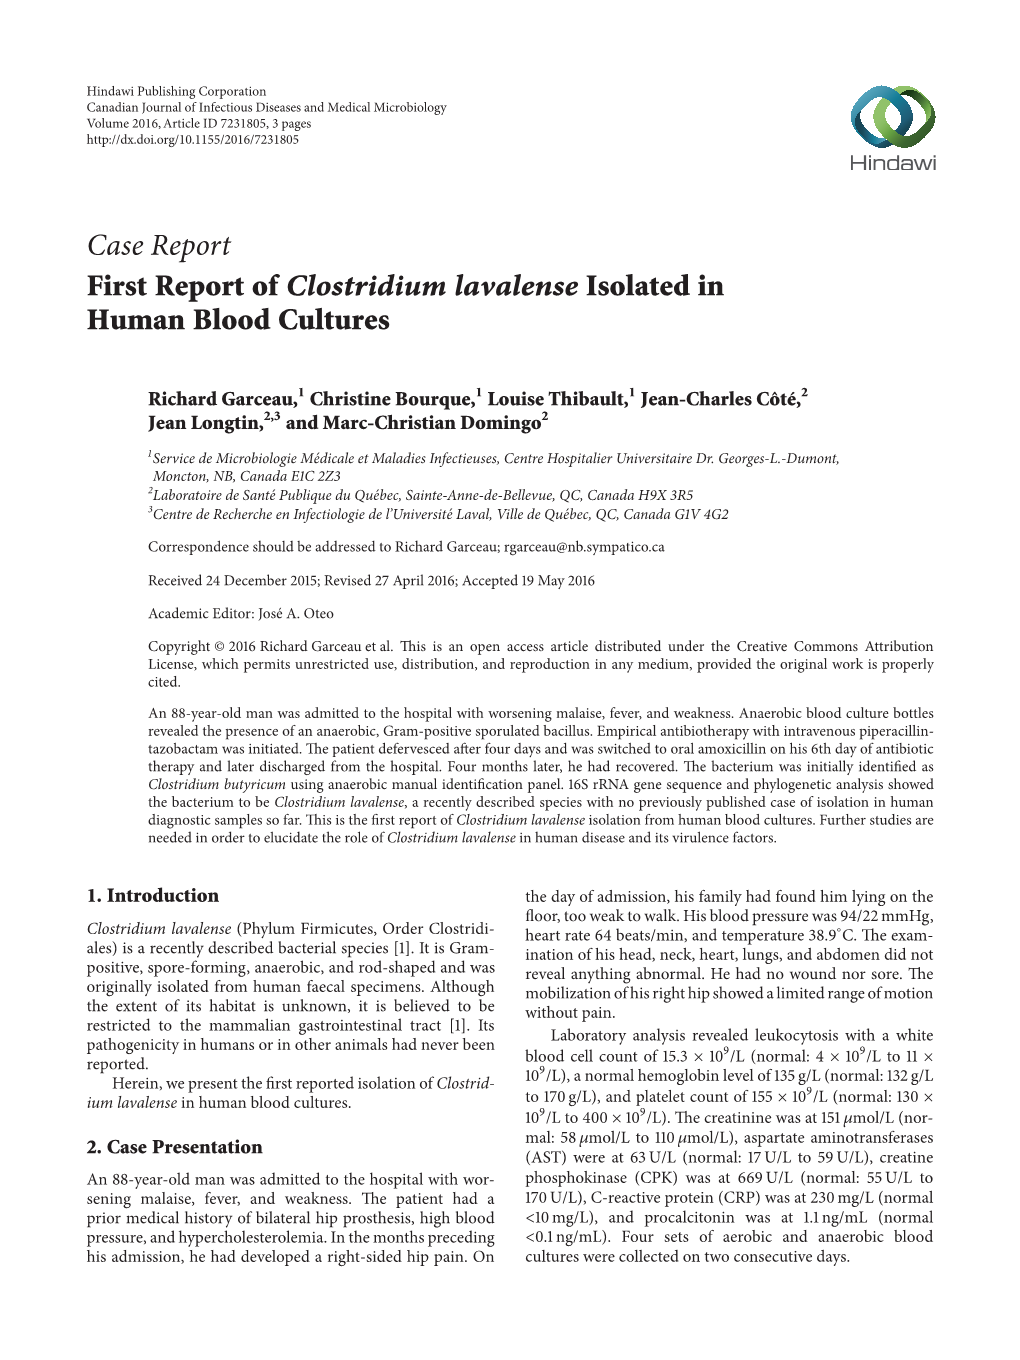 First Report of Clostridium Lavalense Isolated in Human Blood Cultures